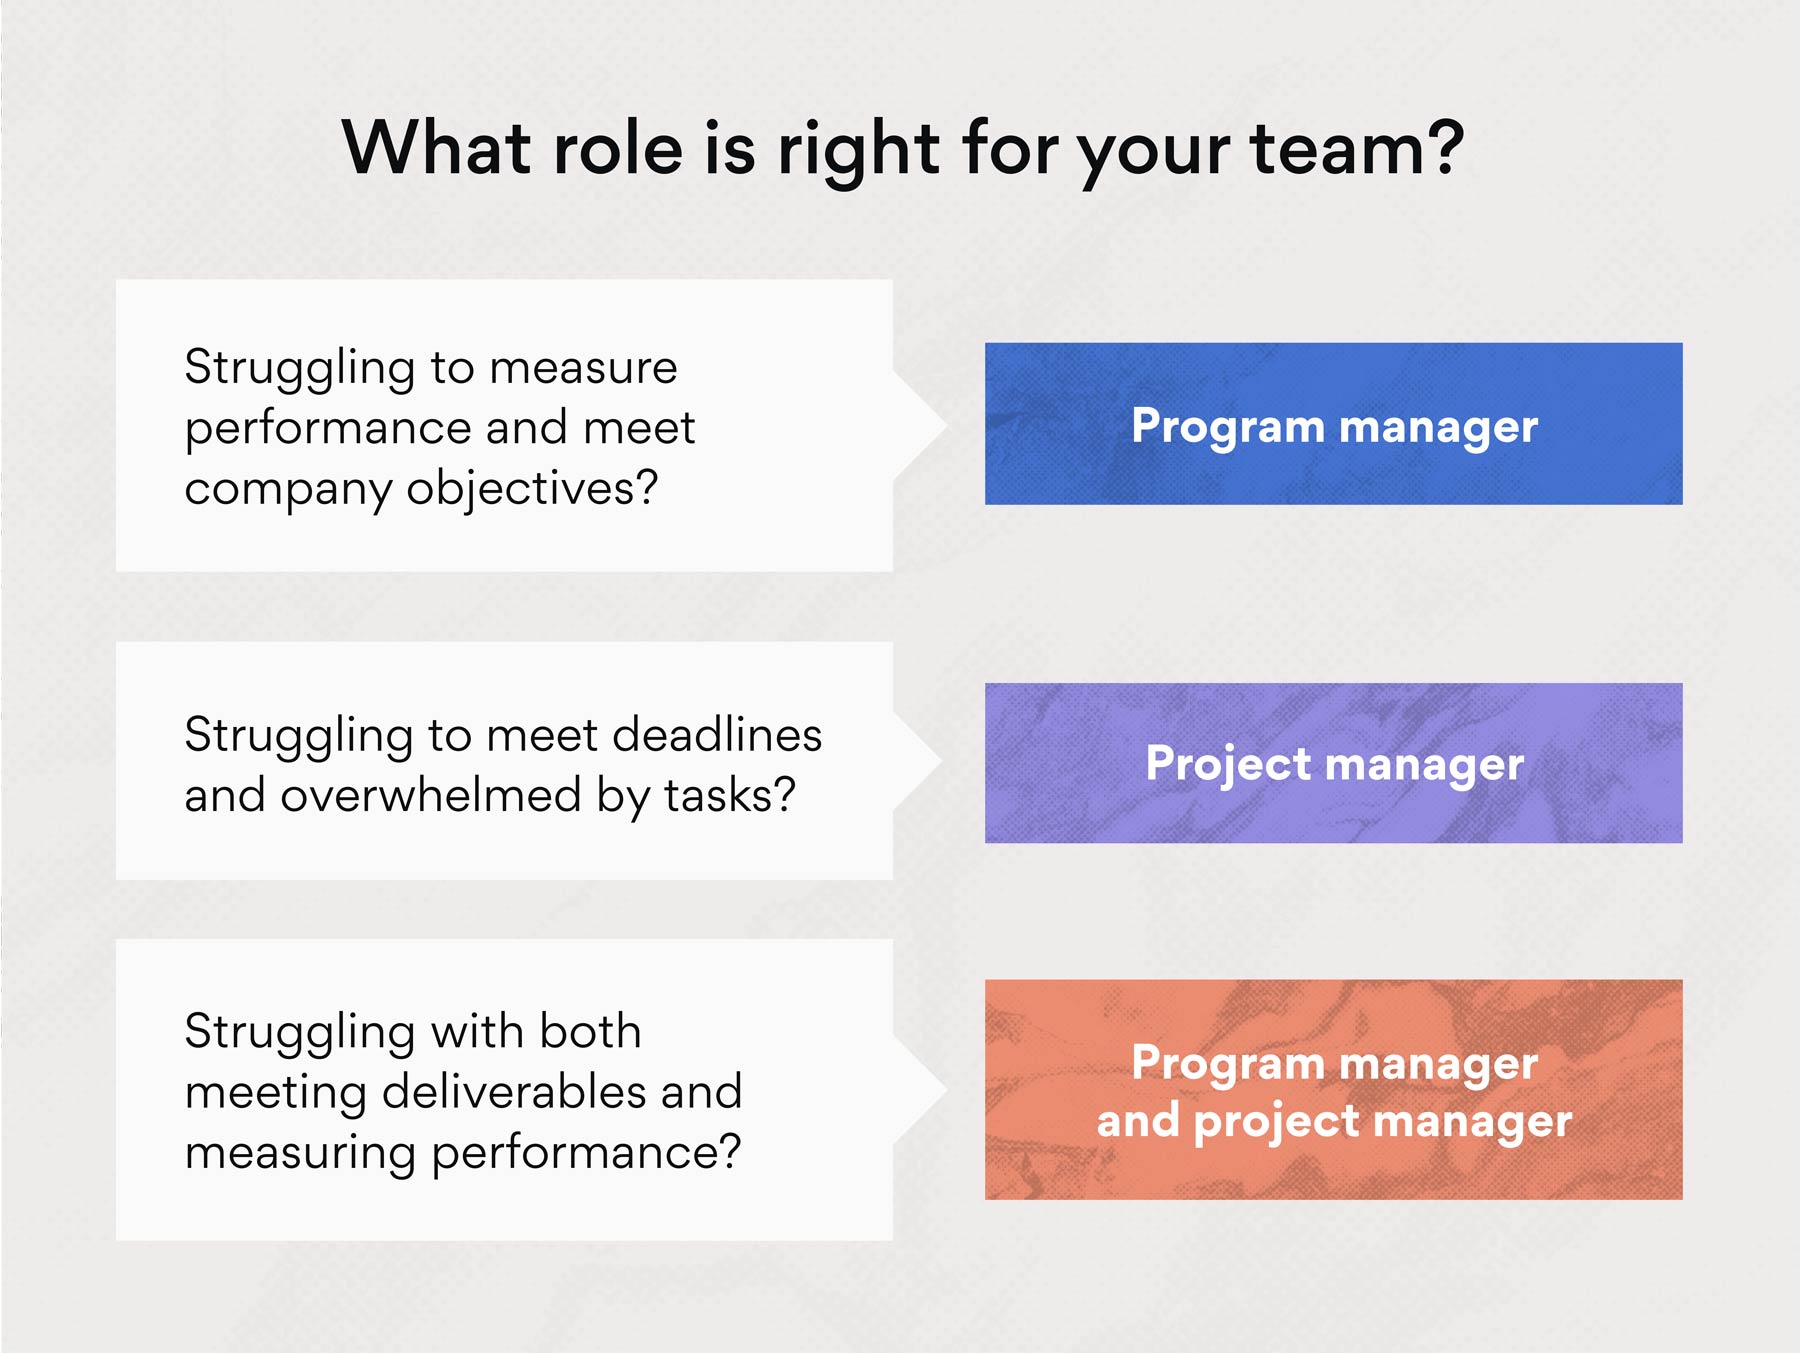 What role is right for your team: Program manager vs project manager?